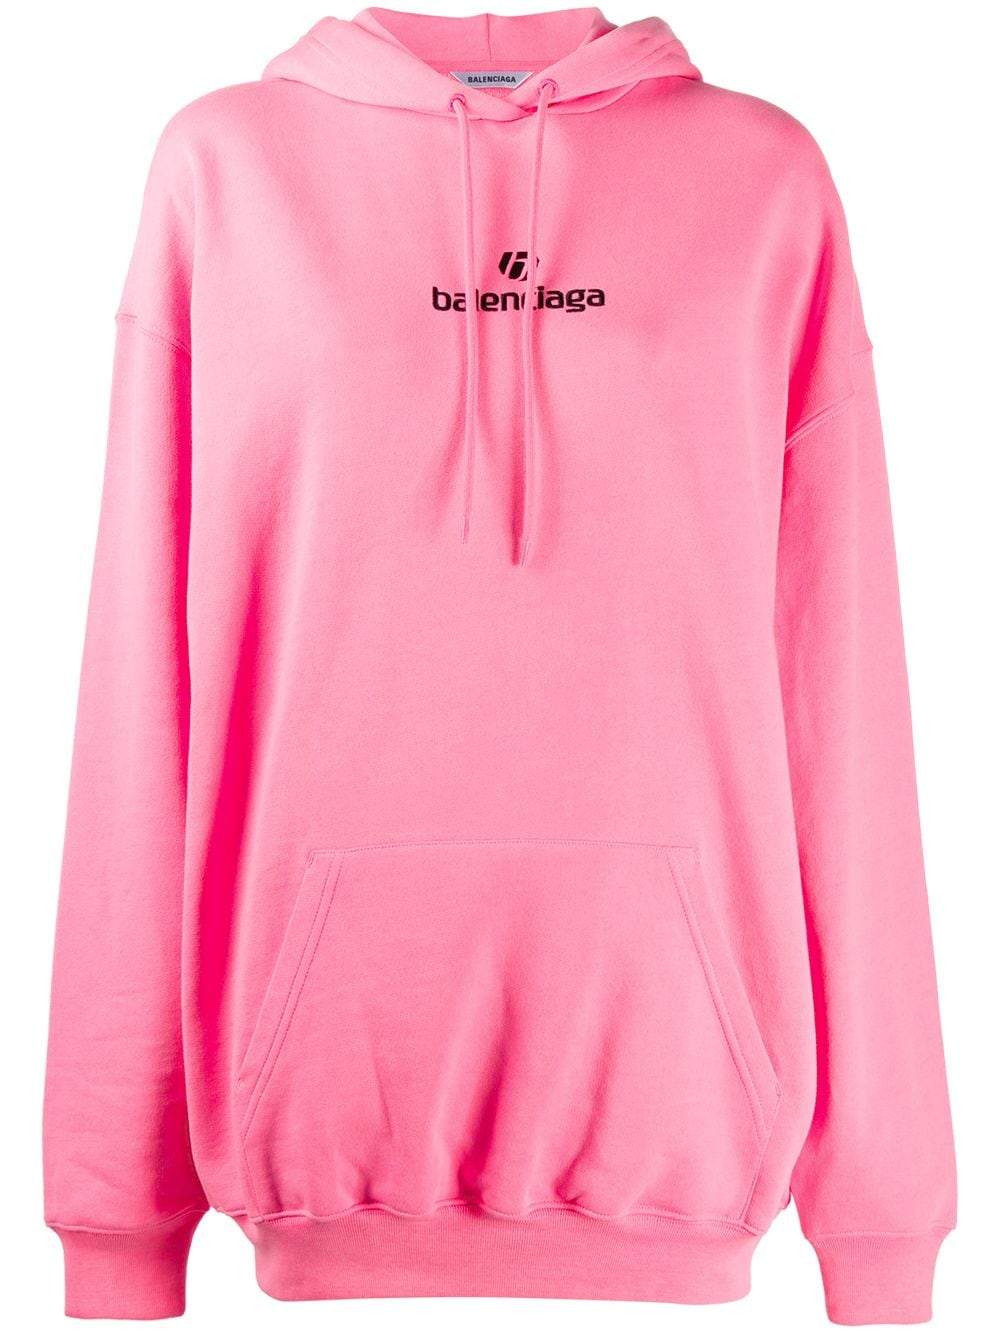 Womens Bb Paris Strass Zipup Hoodie Fitted in Pink  Balenciaga US